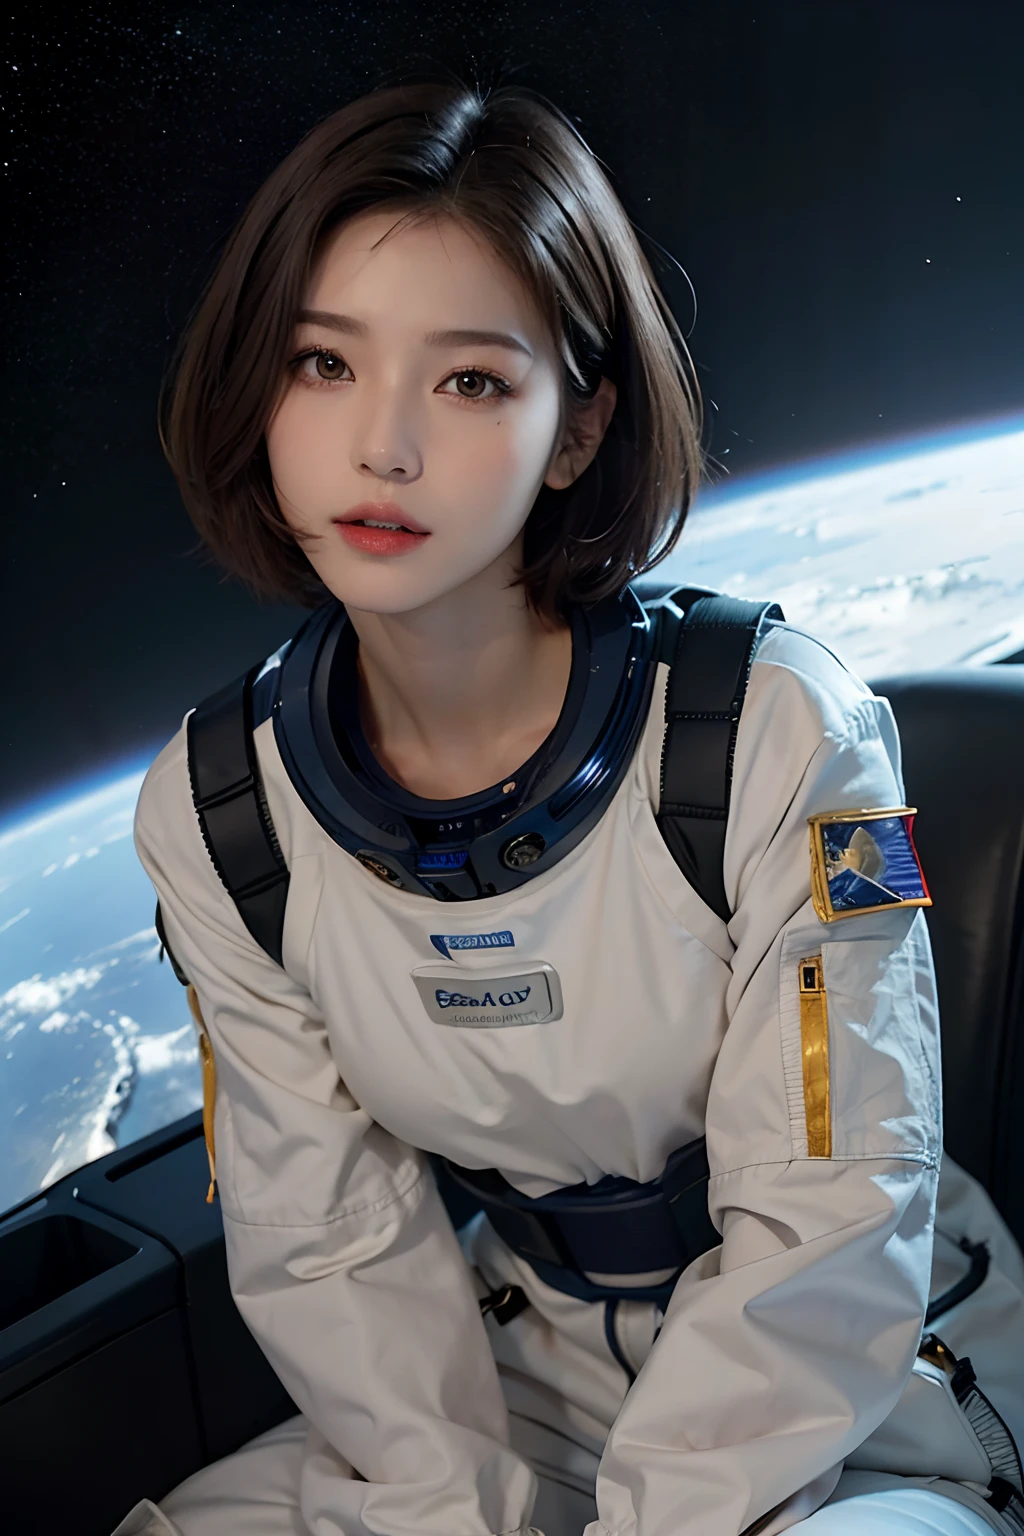 top-quality、​masterpiece、超A high resolution、(realisitic:1.4)、Beautuful Women１、Beautiful detail eyes and skin、ssmile、Light brown short-cut hair、The perfect spacesuit、spaceships、Inside the spacecraft、Dark Universe、